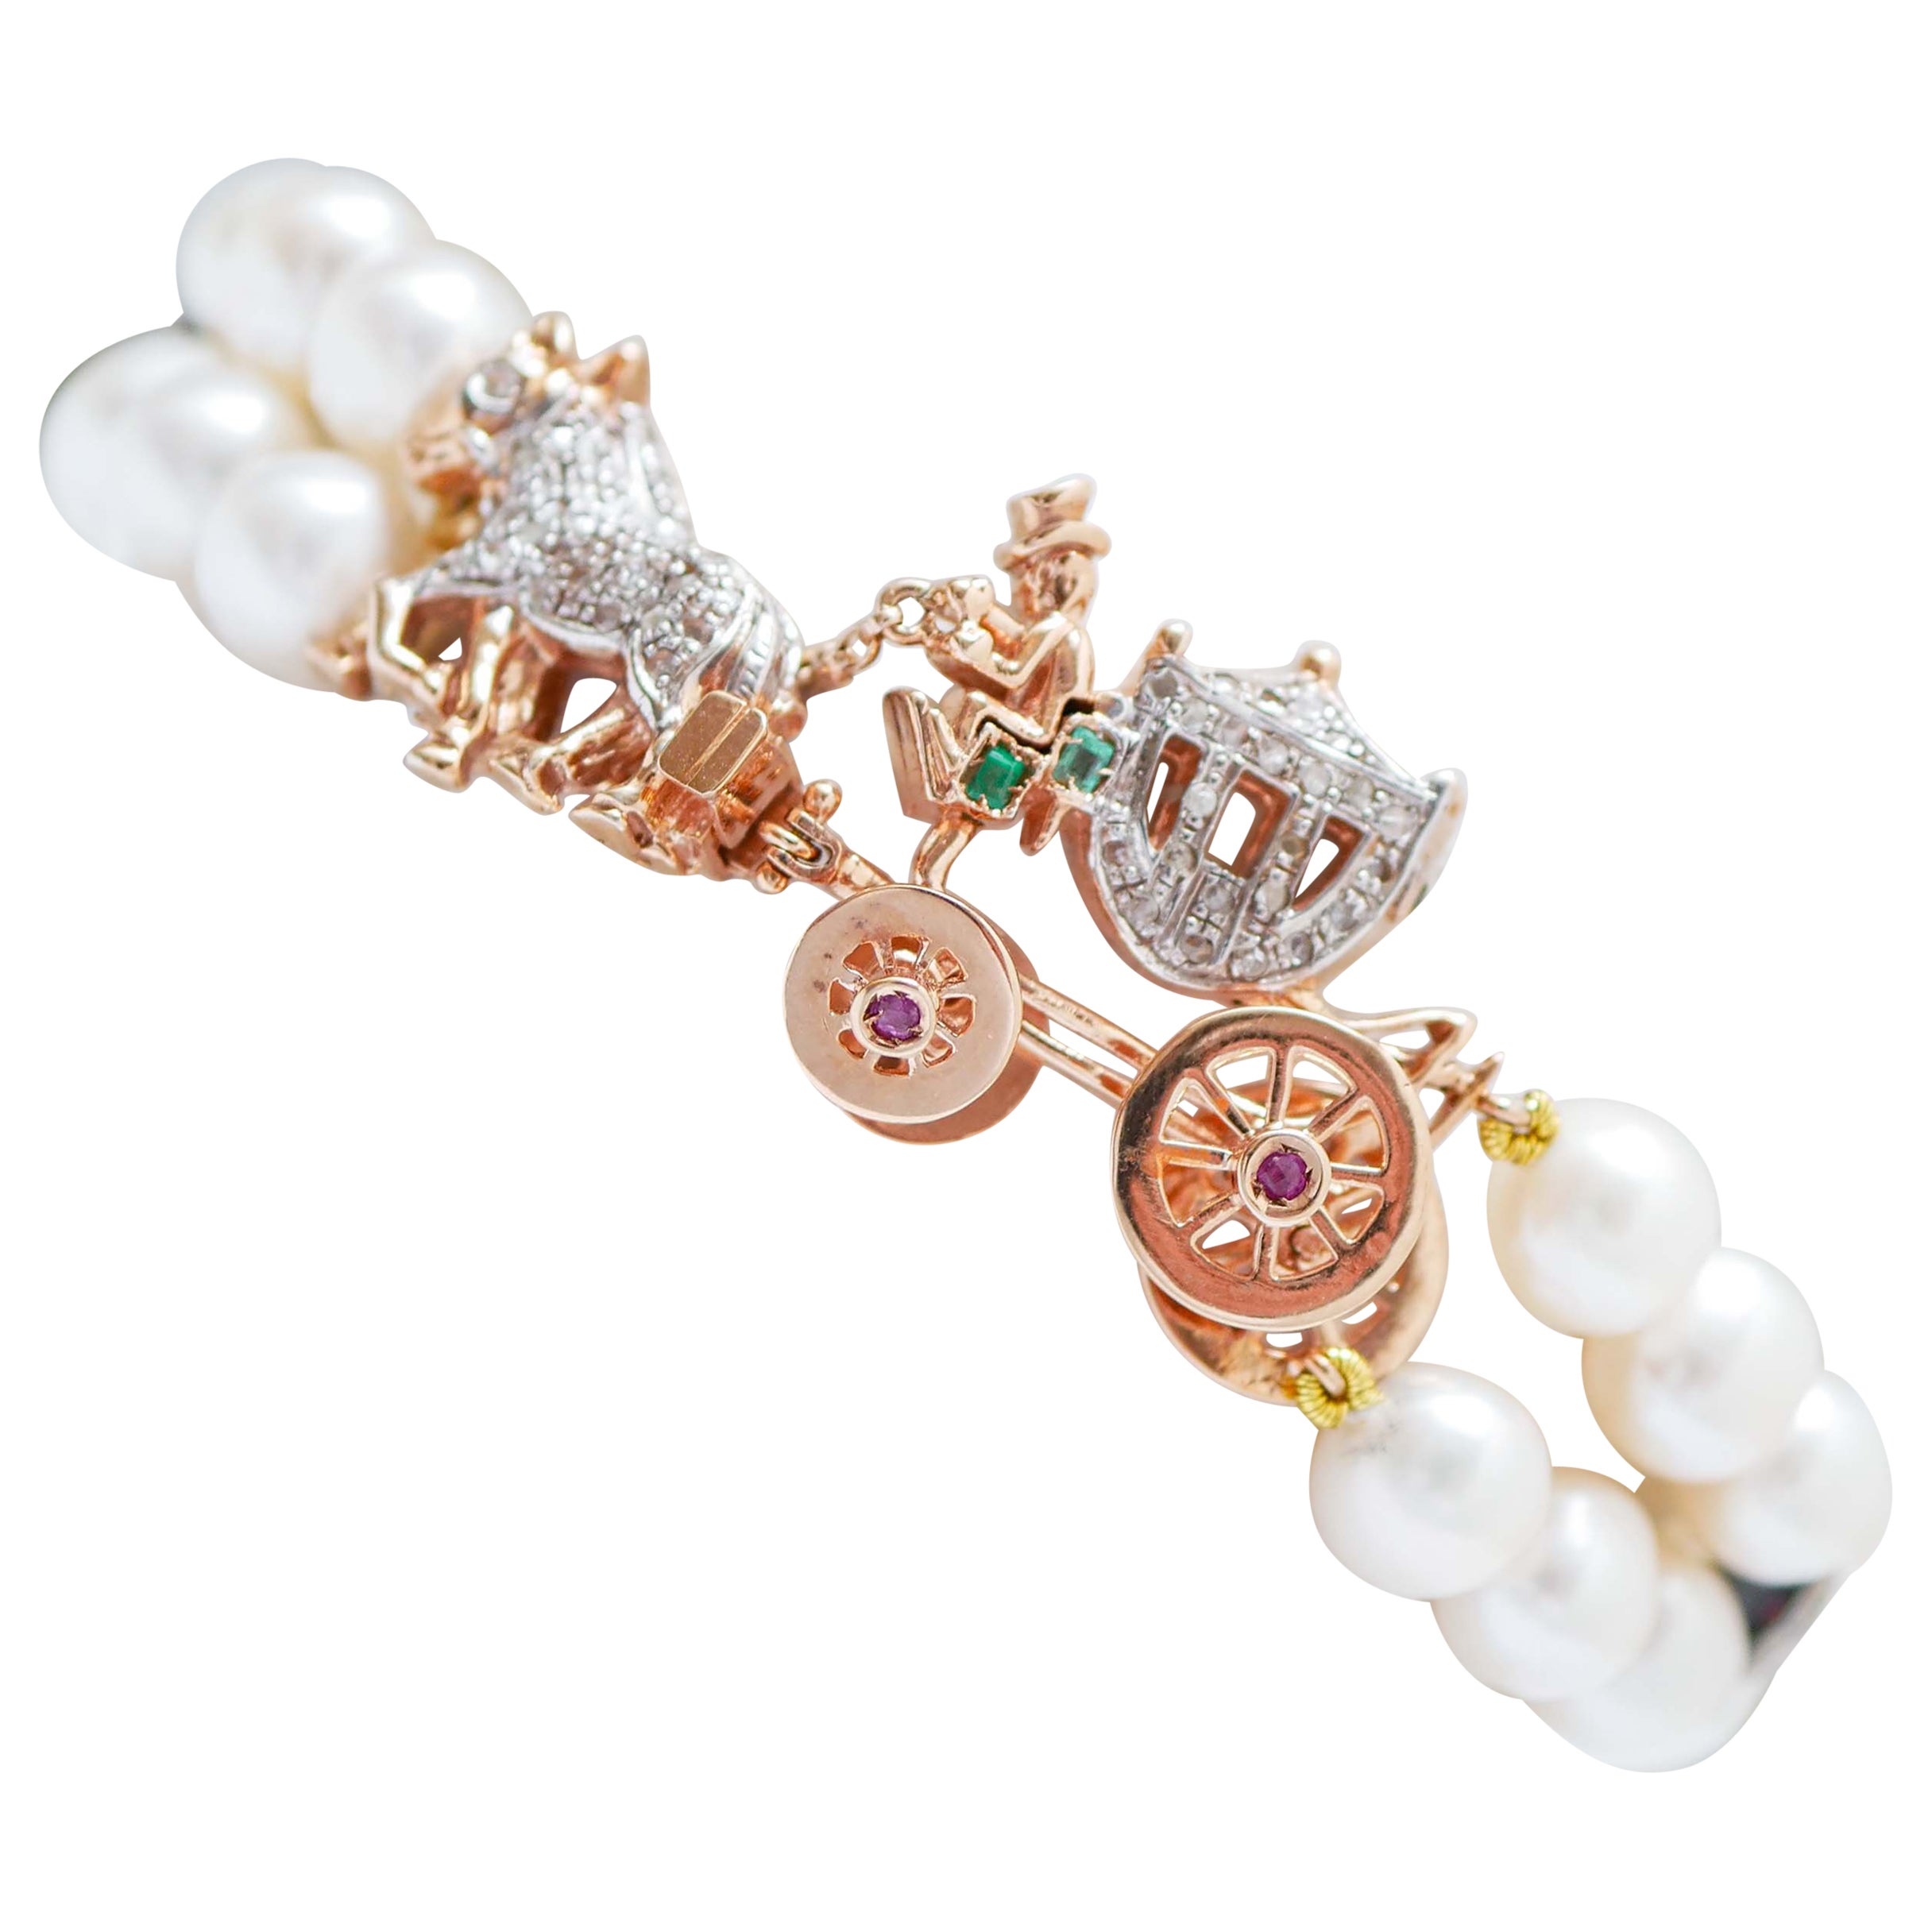 Pearls, Rubies, Emeralds, Diamonds, Rose Gold and Silver Carriage Bracelet